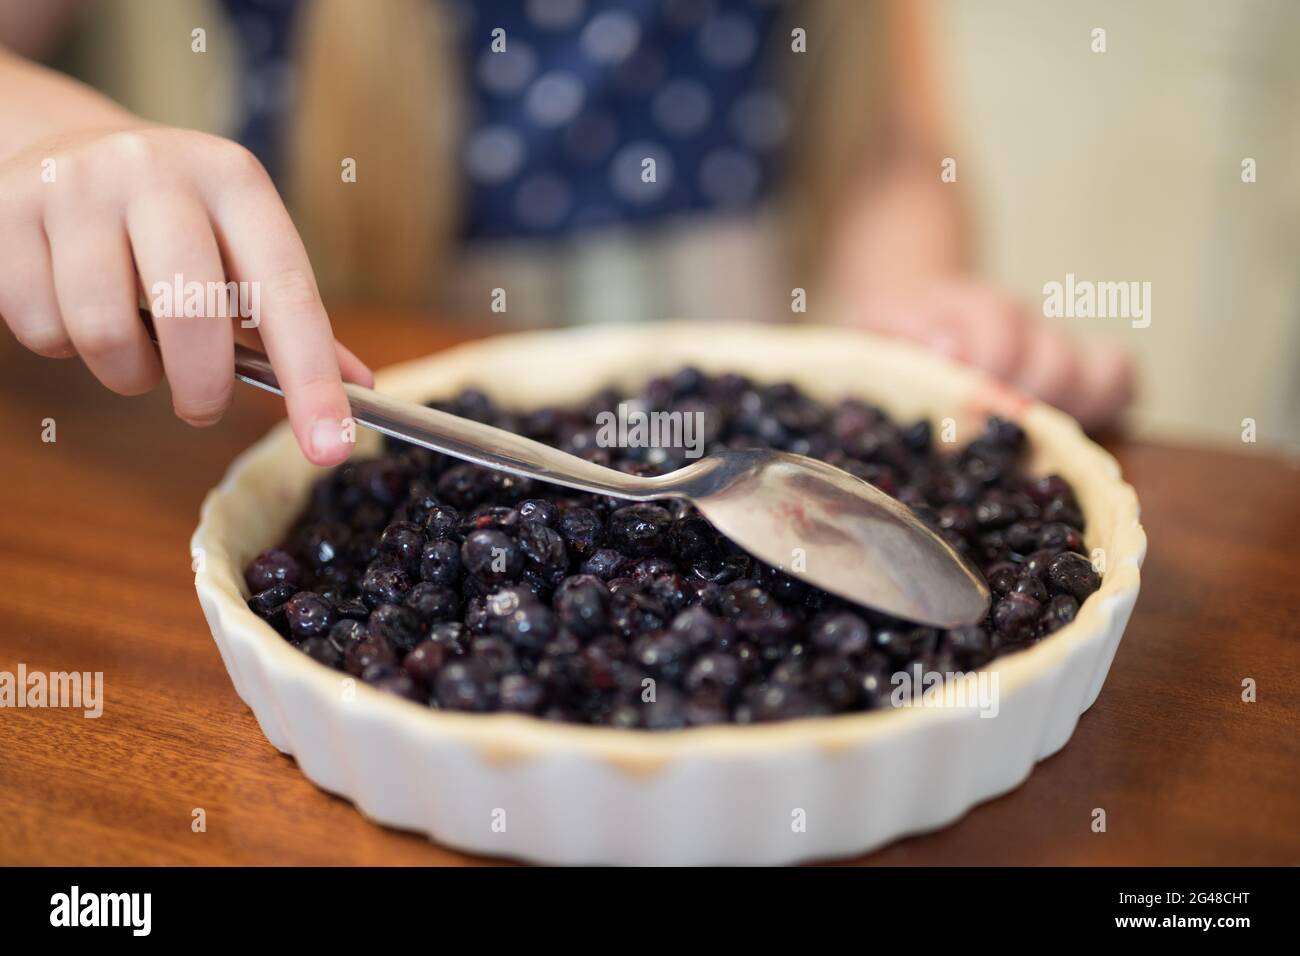 Young girl preparing blue berry pie Stock Photo